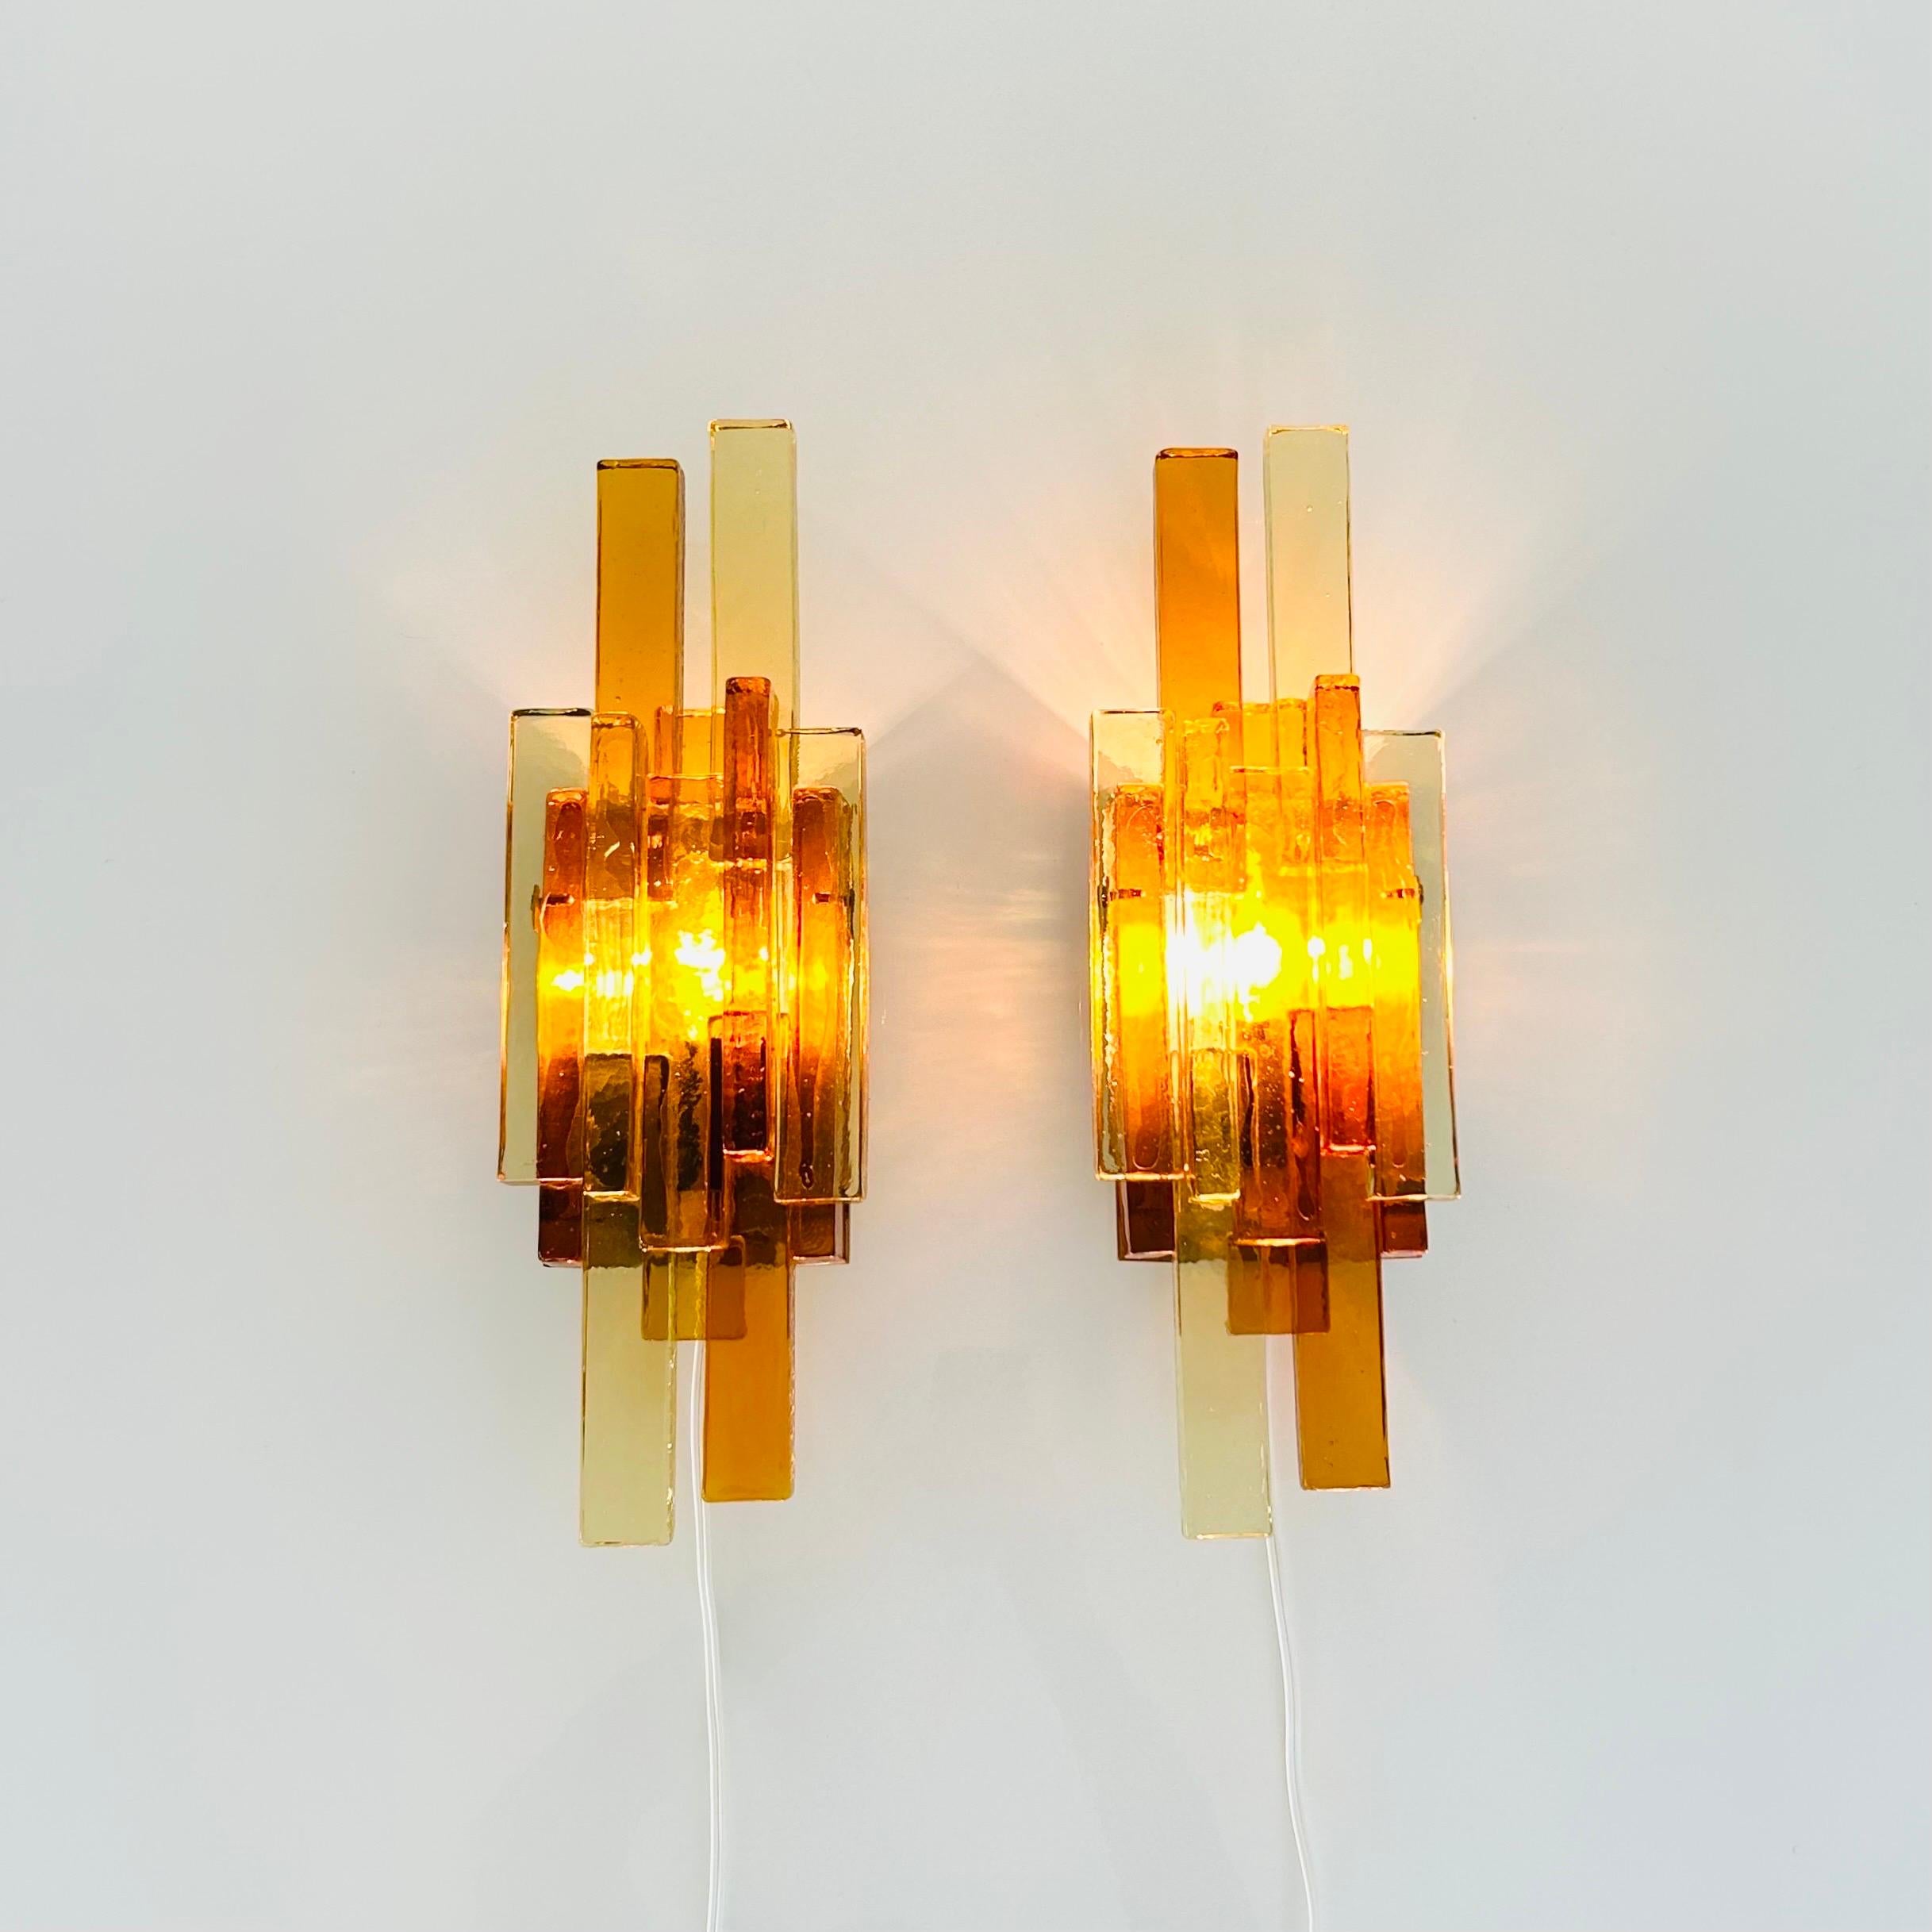 Introducing a stunning pair of vintage sconces by the renowned Danish designer Svend Aage Holm Sørensen. These sconces are a true masterpiece of Danish modern lamp art, featuring thick yellow and amber glass bricks mounted on a brass lacquered wall